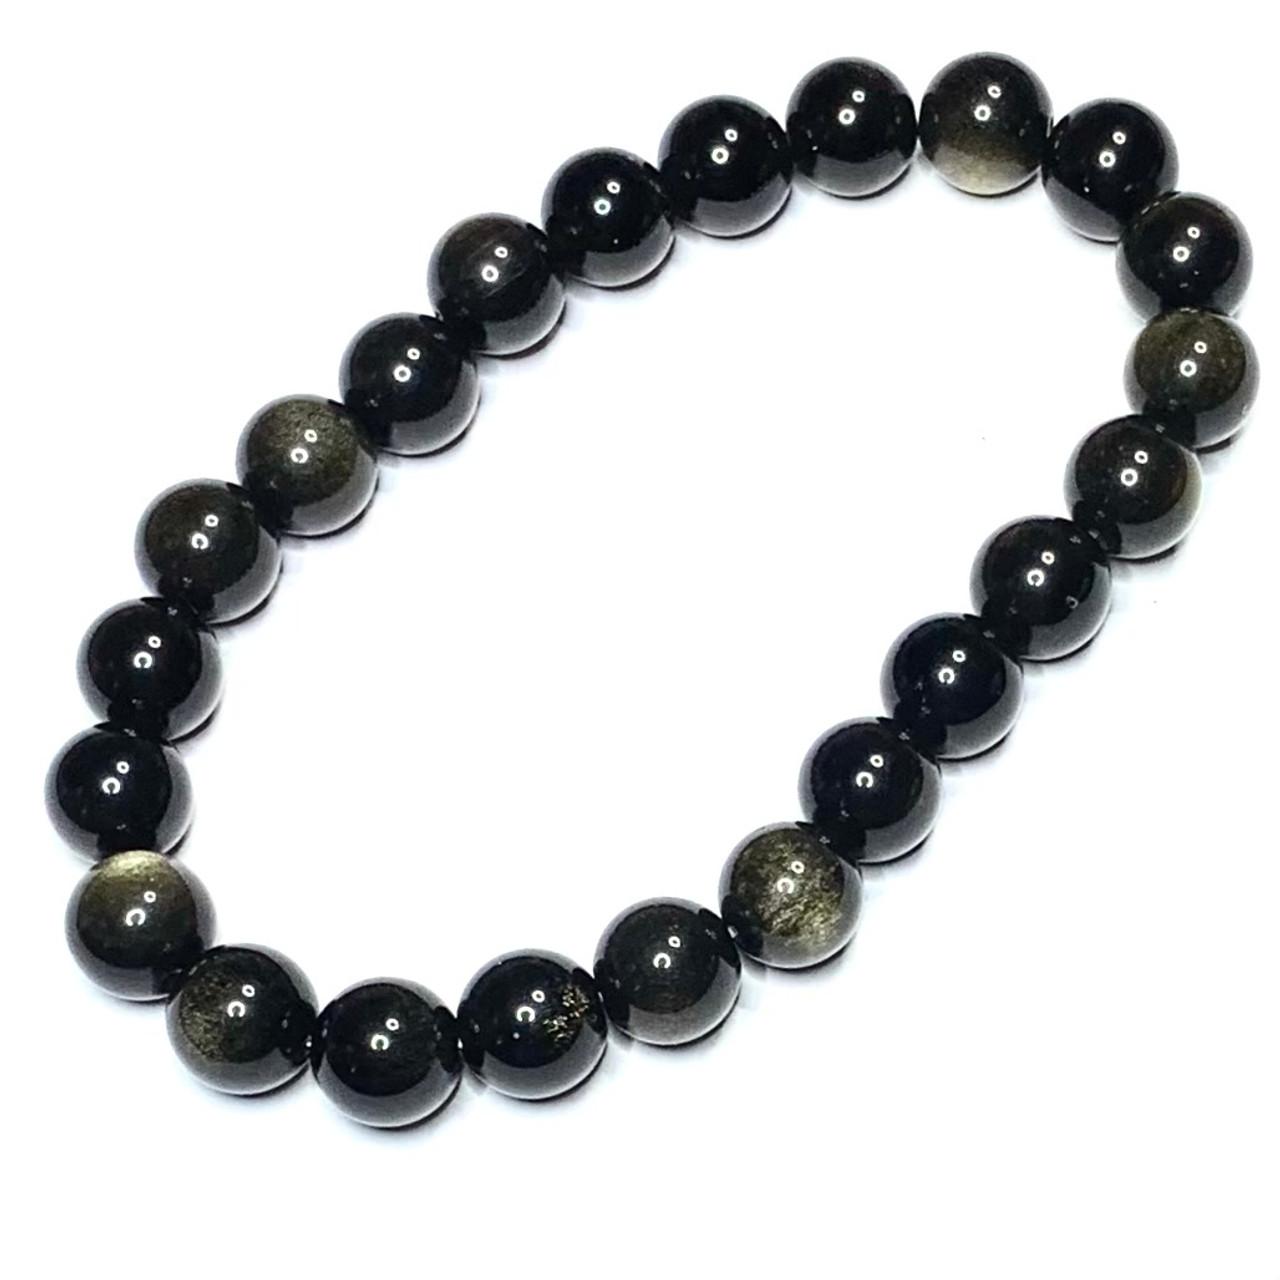 Black Onyx Beads - 8mm round  (Smooth & High Polished for Jewelry